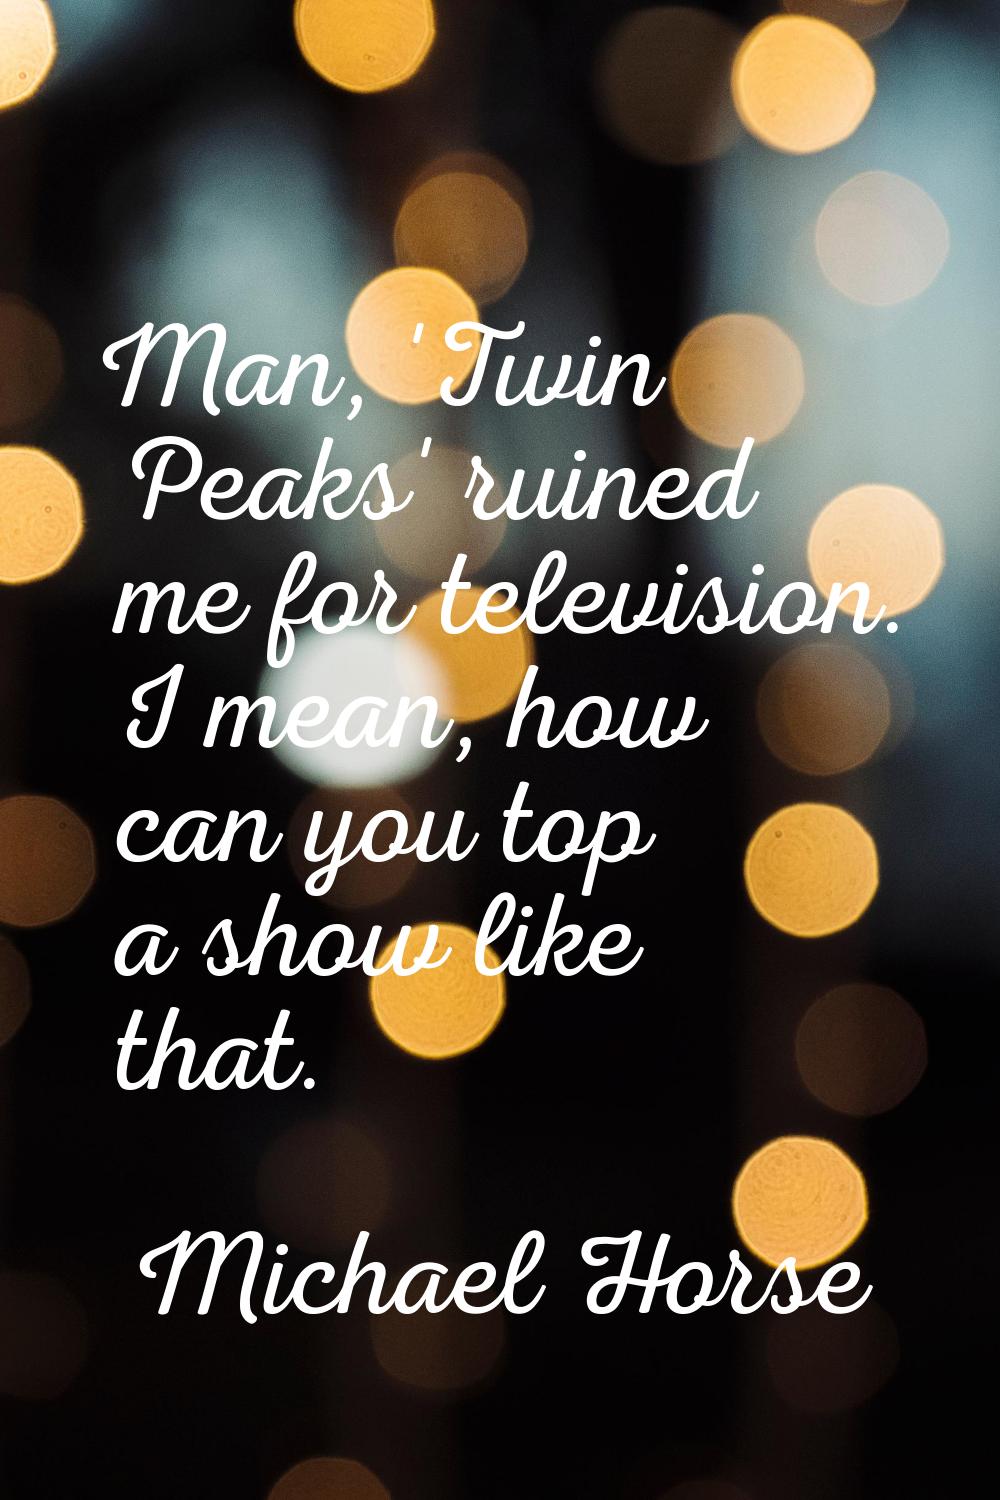 Man, 'Twin Peaks' ruined me for television. I mean, how can you top a show like that.